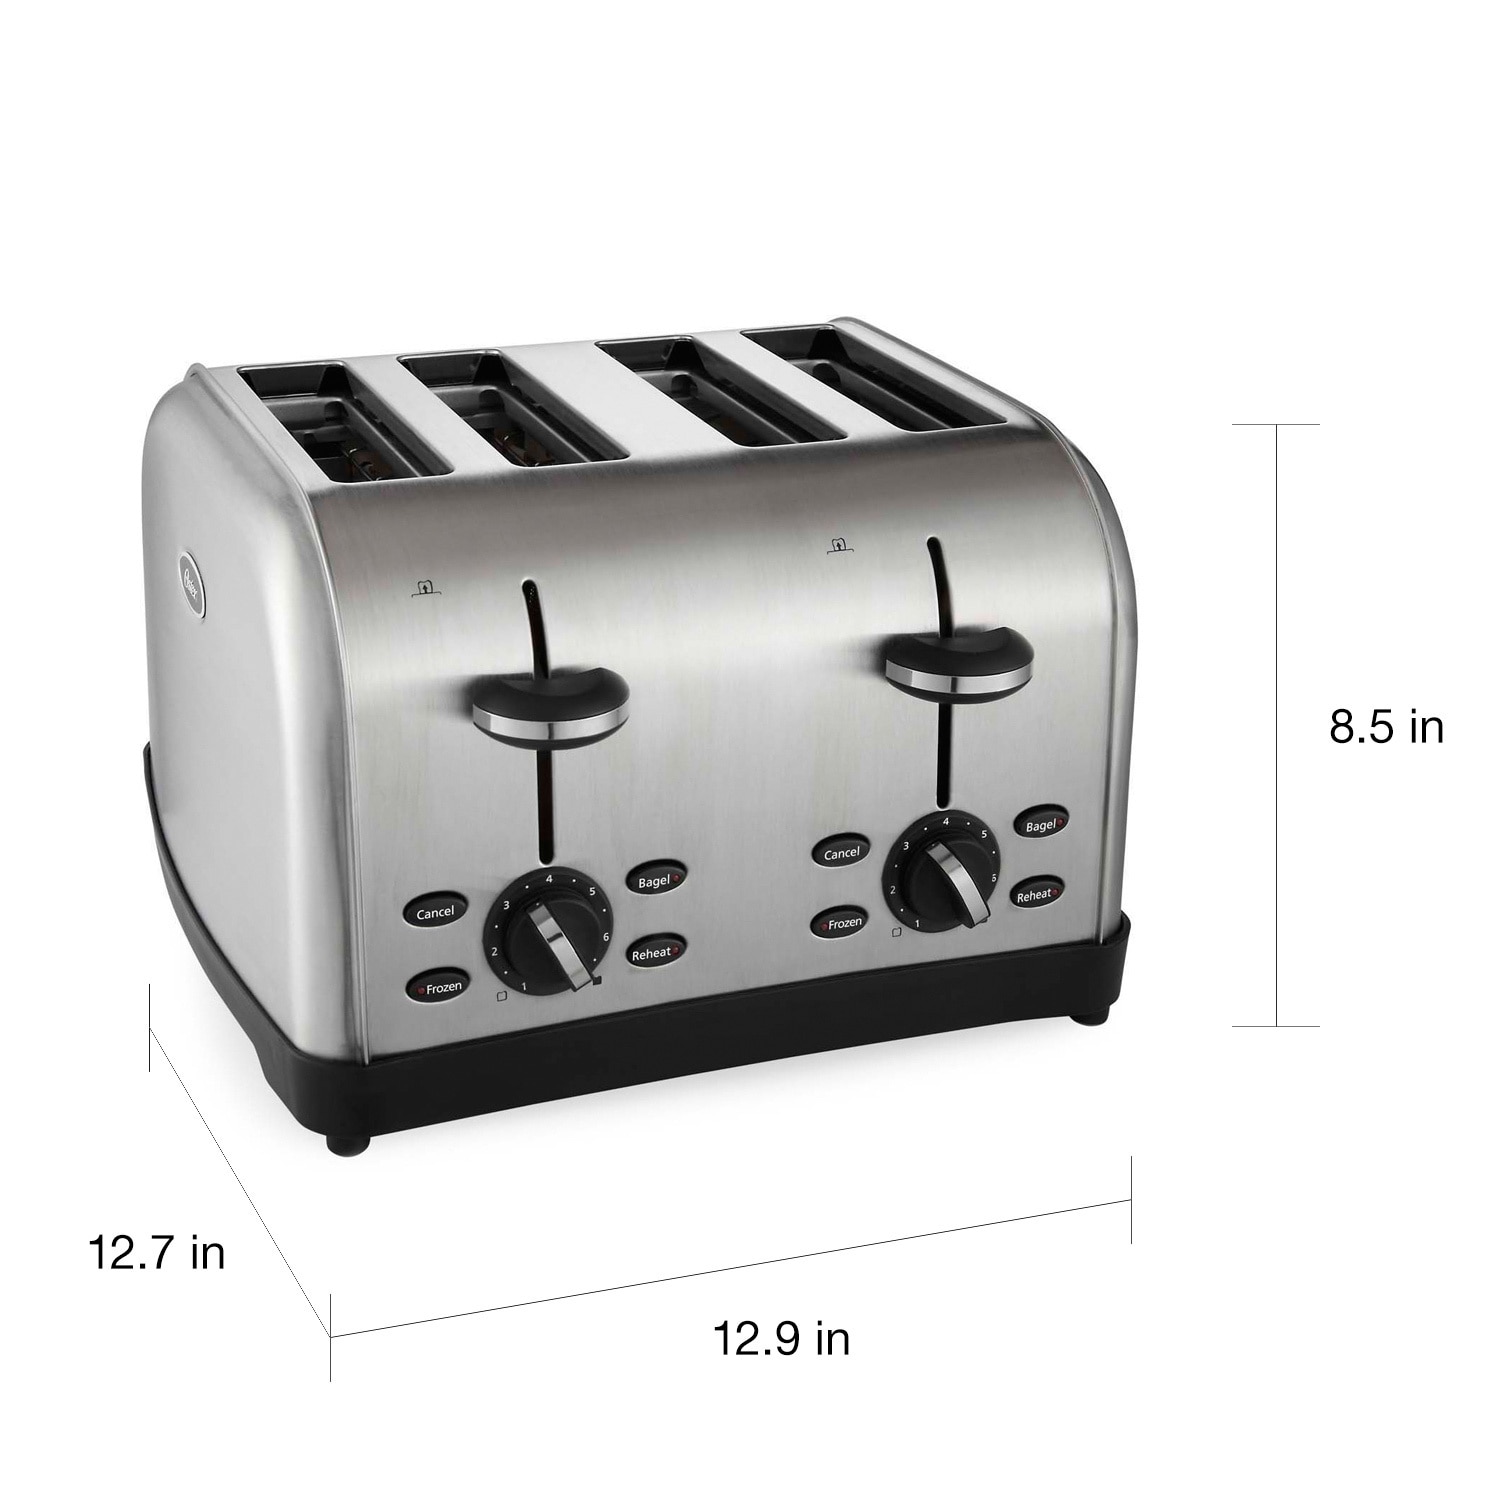 https://ak1.ostkcdn.com/images/products/10705190/Oster-4-slice-Stainless-Steel-Retractable-Cord-Toaster-d7ce9839-8964-4163-94e4-d765a1d4221a.jpg